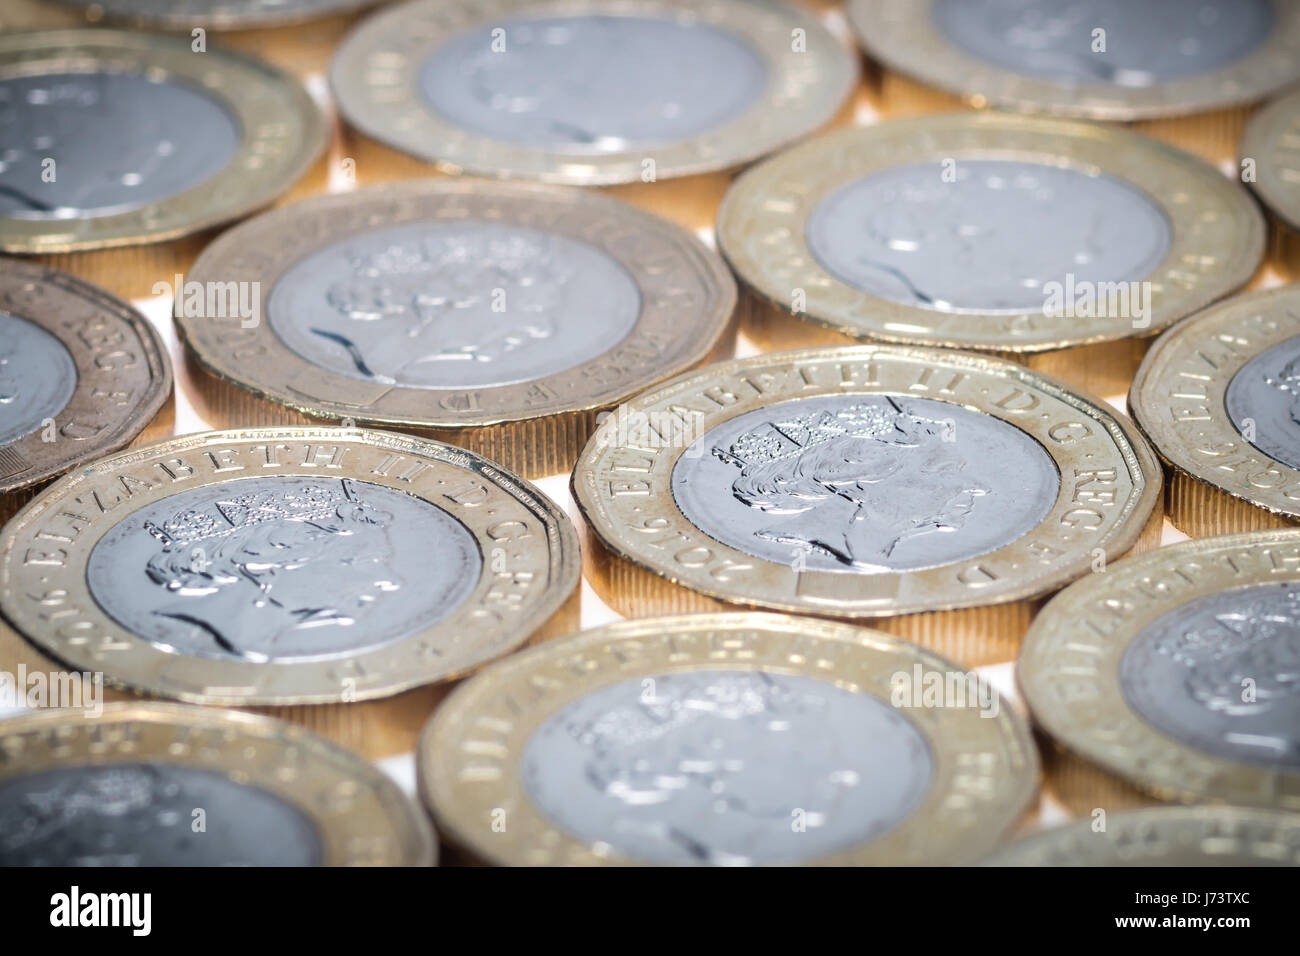 Rows of the new 2017 twelve sided pound coins. Stock Photo